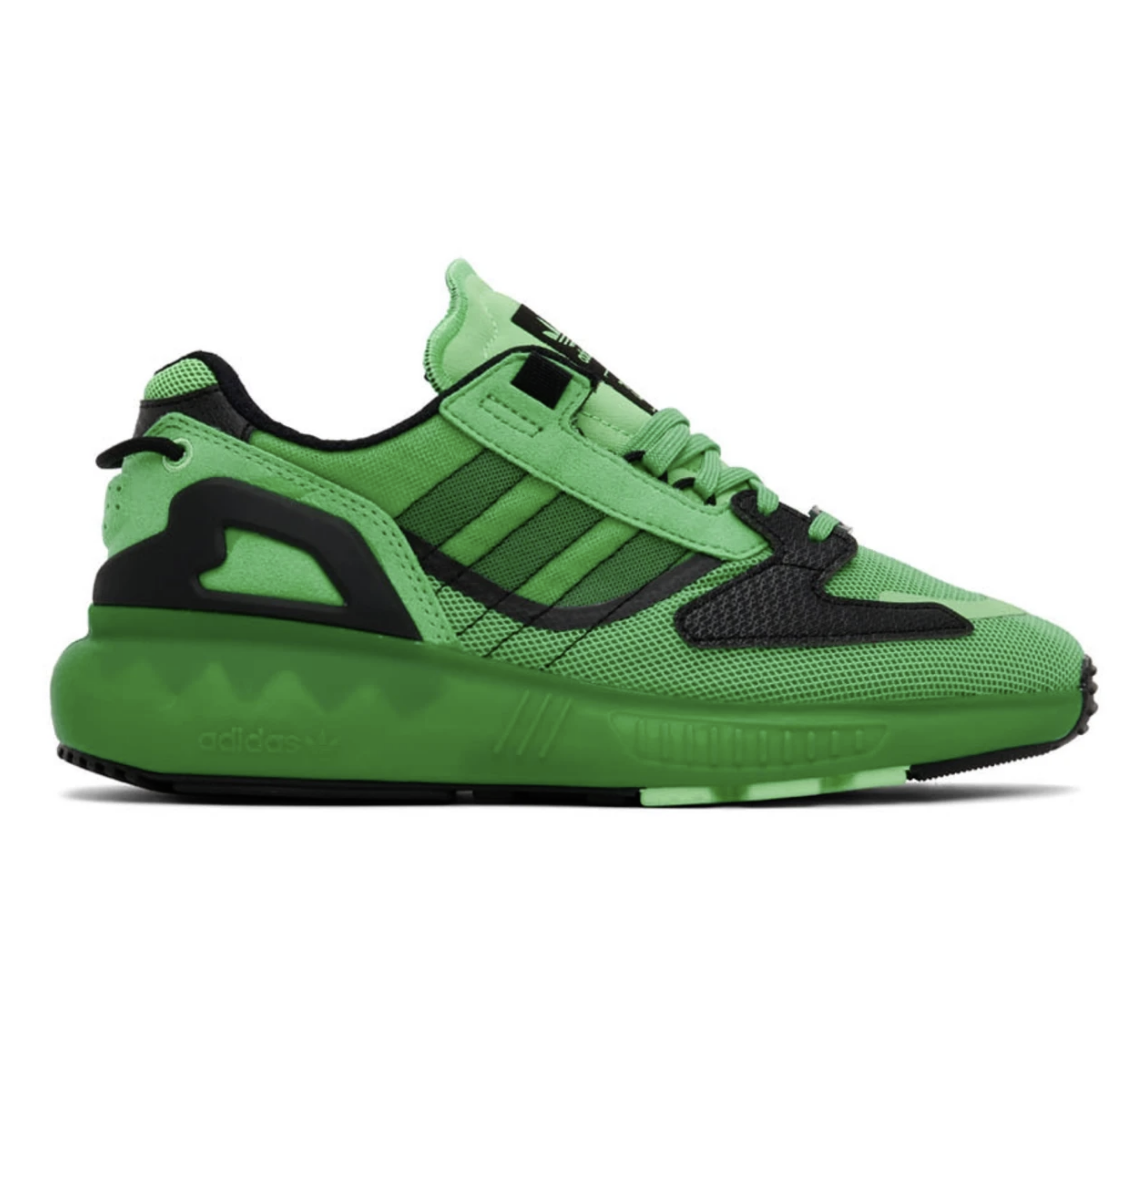 Now Available: adidas ZX 5K Boost 